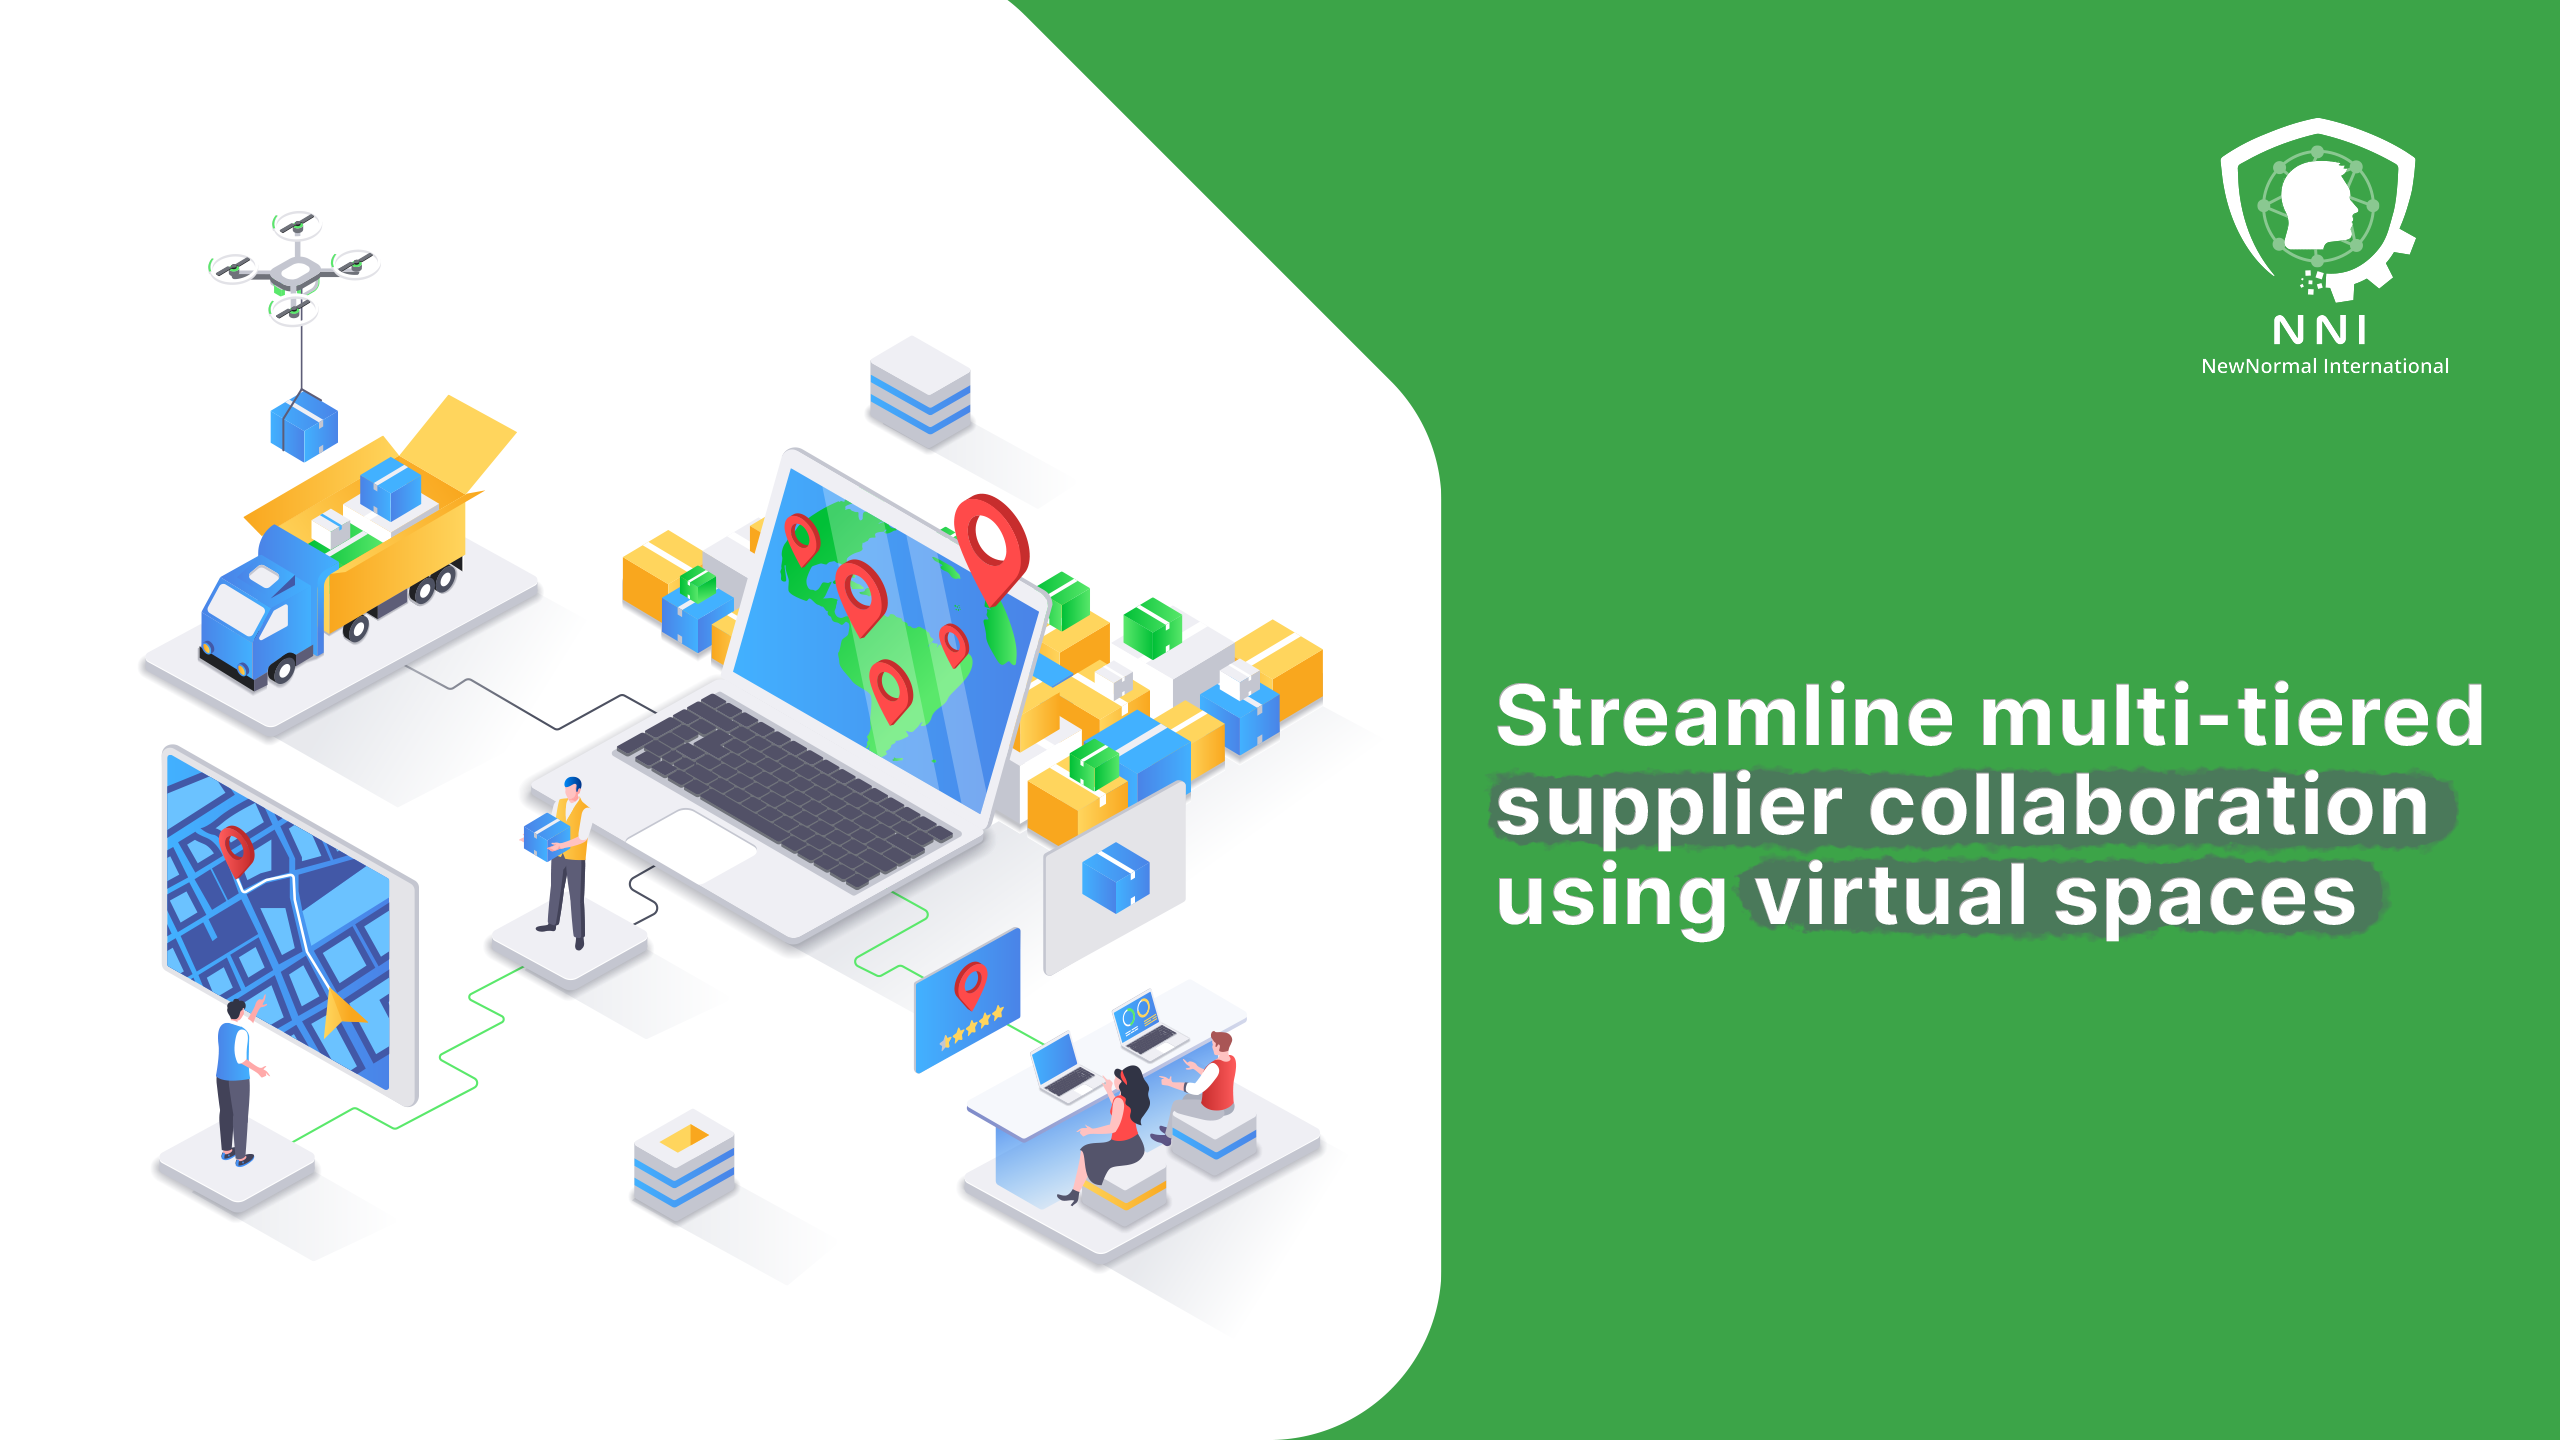 Streamlining Multi-Tiered Supplier Collaboration Using Virtual Spaces